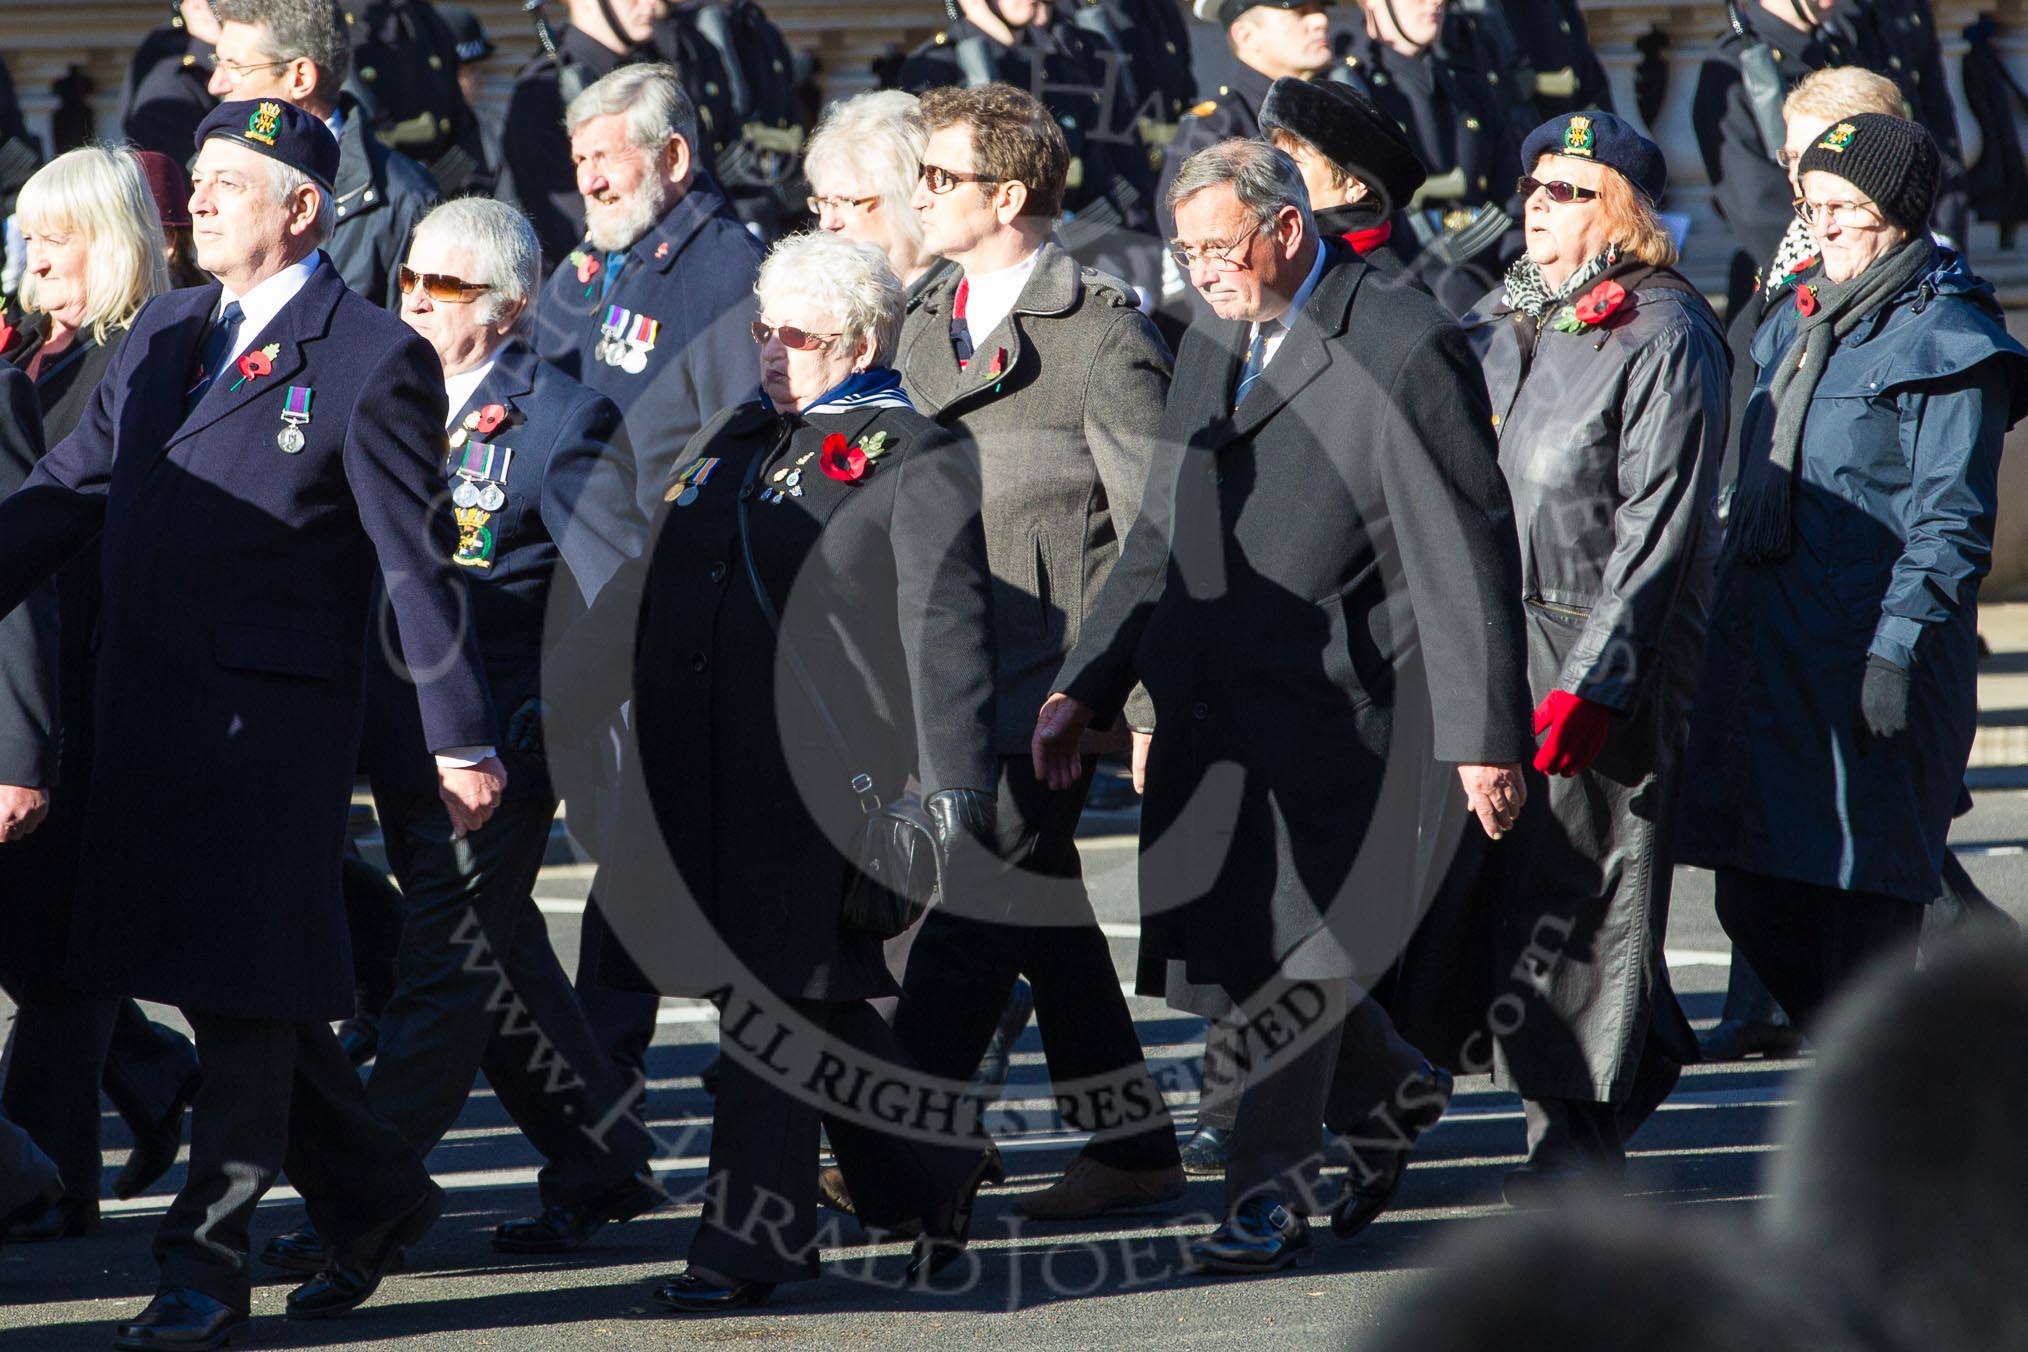 Remembrance Sunday 2012 Cenotaph March Past: Group E31 - Royal Naval Communications Association..
Whitehall, Cenotaph,
London SW1,

United Kingdom,
on 11 November 2012 at 11:41, image #228